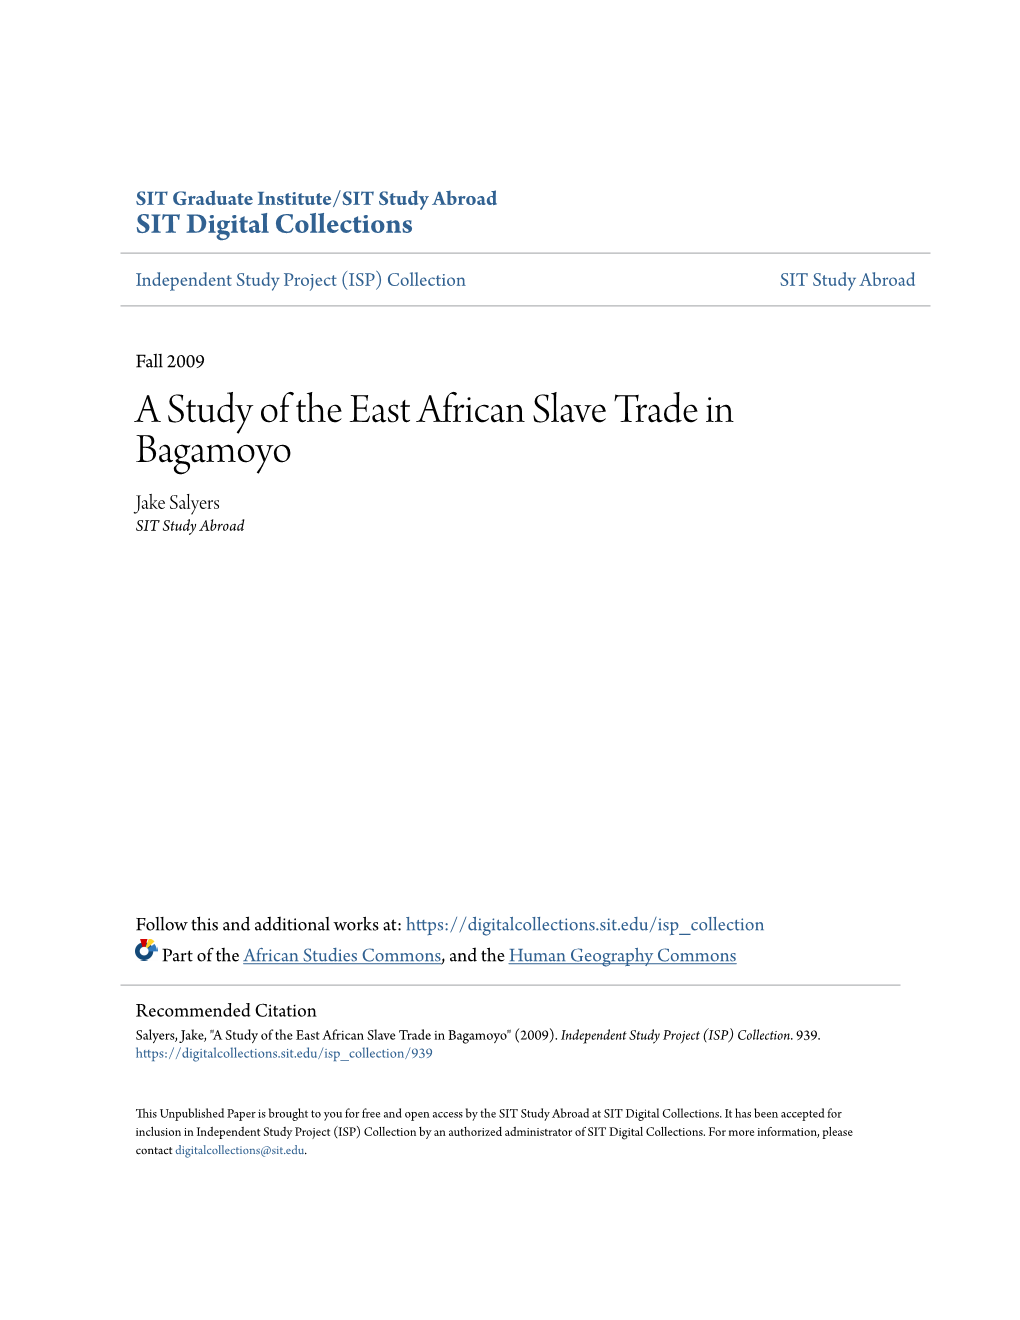 A Study of the East African Slave Trade in Bagamoyo Jake Salyers SIT Study Abroad